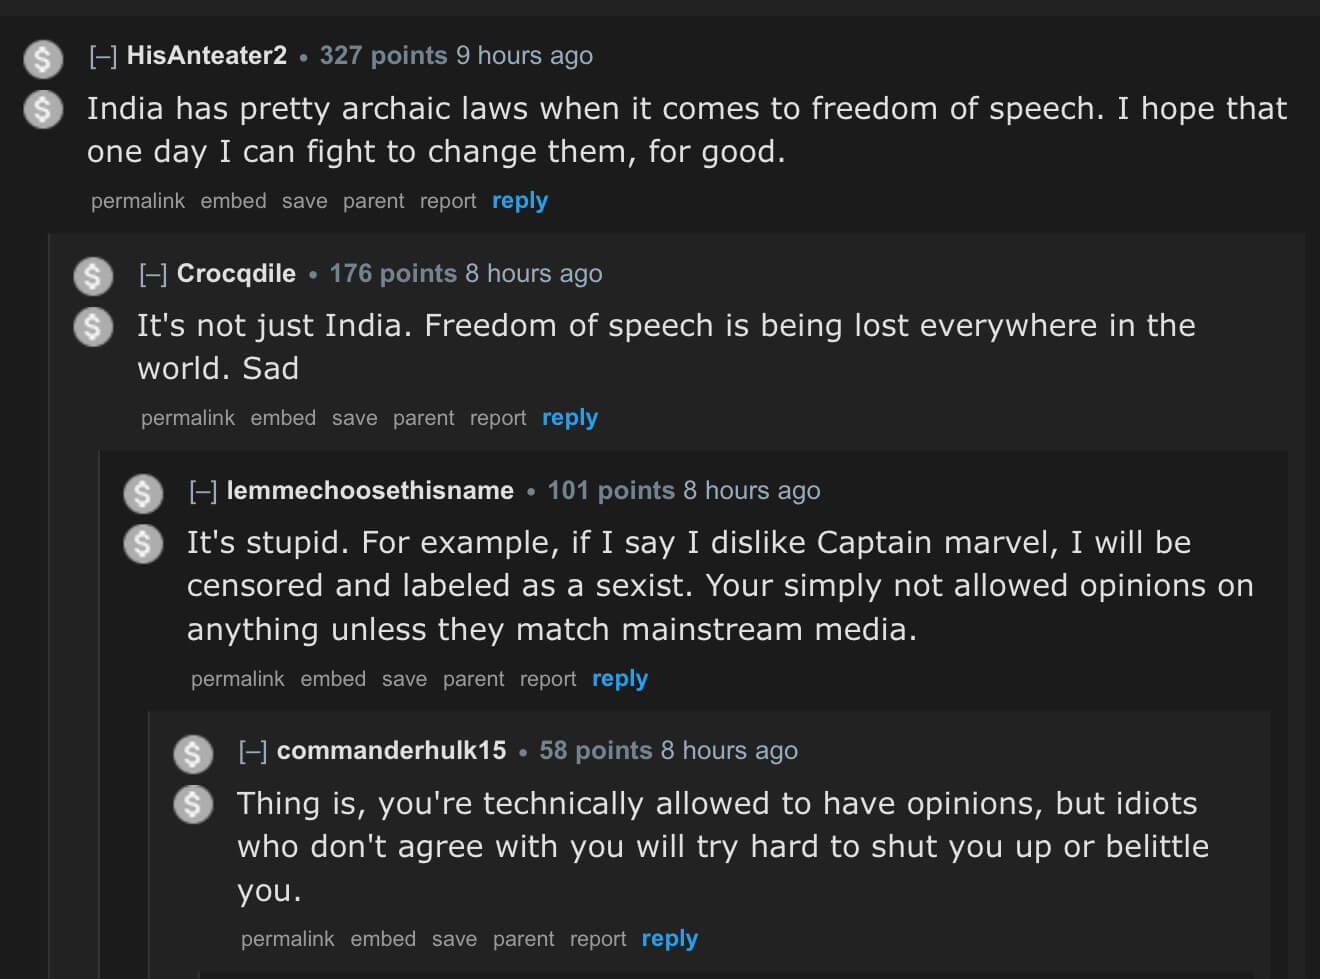 Reddit users claiming this takedown order highlights India's archaic freedom of speech laws and represents a wider loss of freedom of speech around the world.